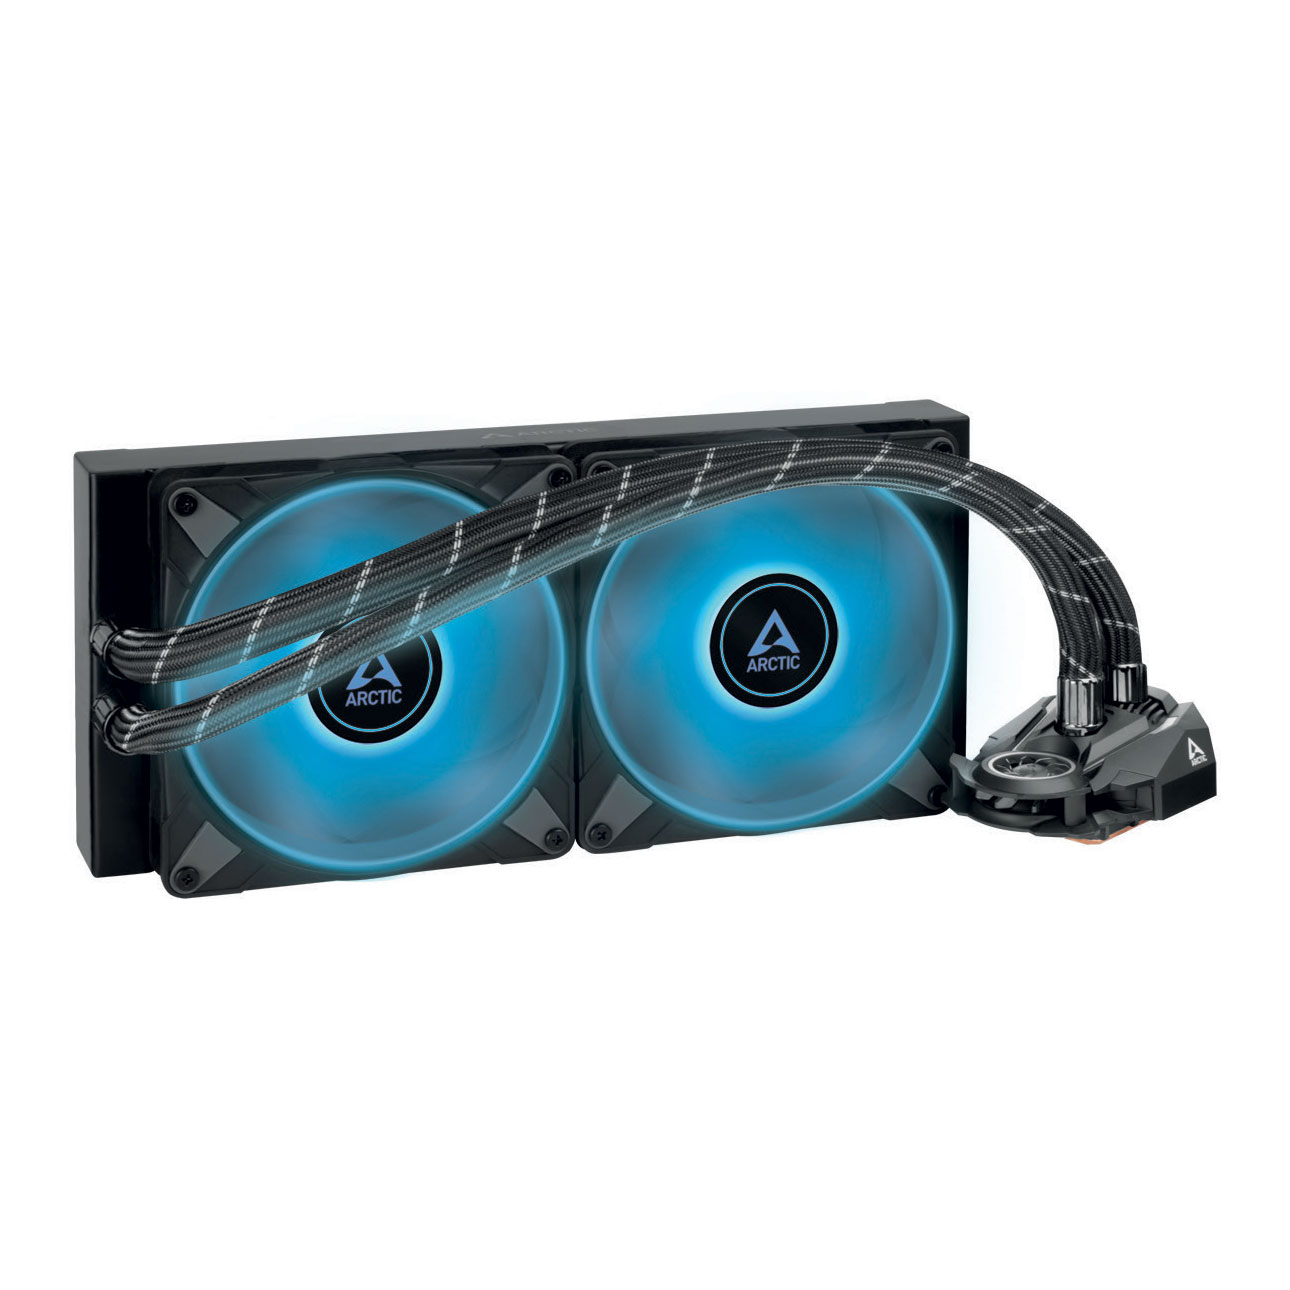 Arctic Liquid Freezer II - 280 RGB : All-in-One CPU Water Cooler with 280mm radiator and 2x P14 PWM - Arctic 2.35.64.03.011